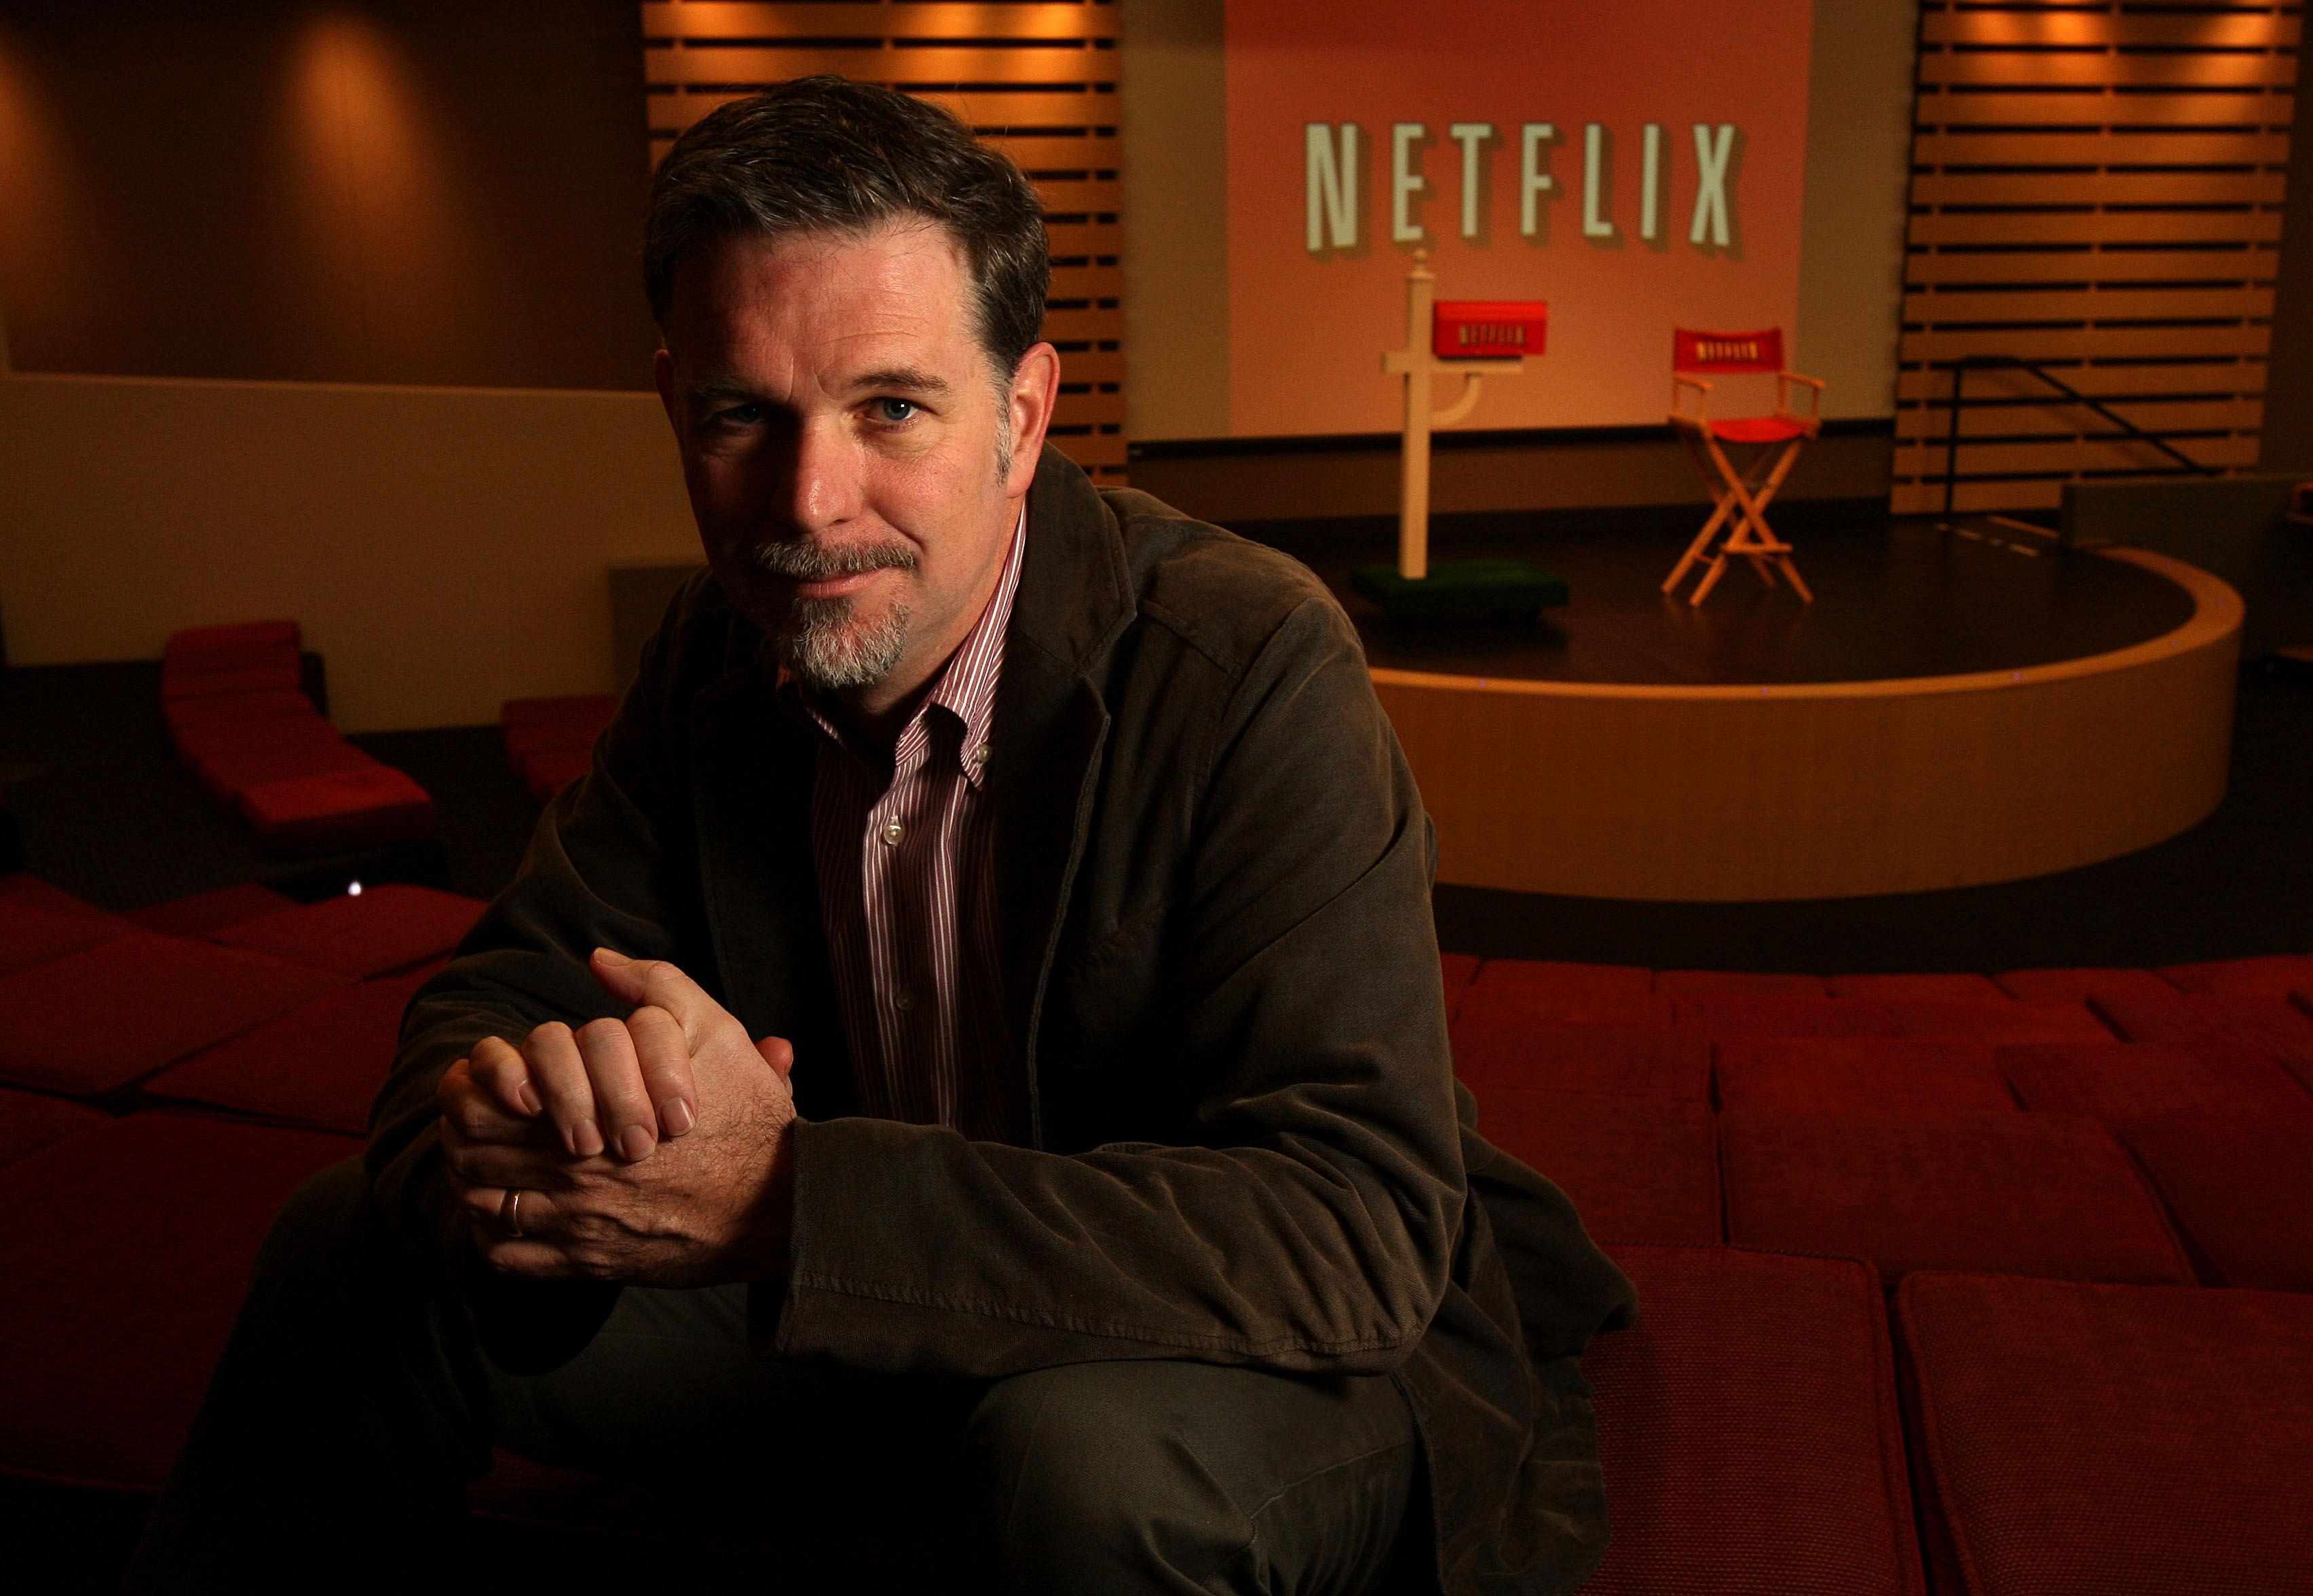 Reed Hastings, the founder and CEO of Netflix